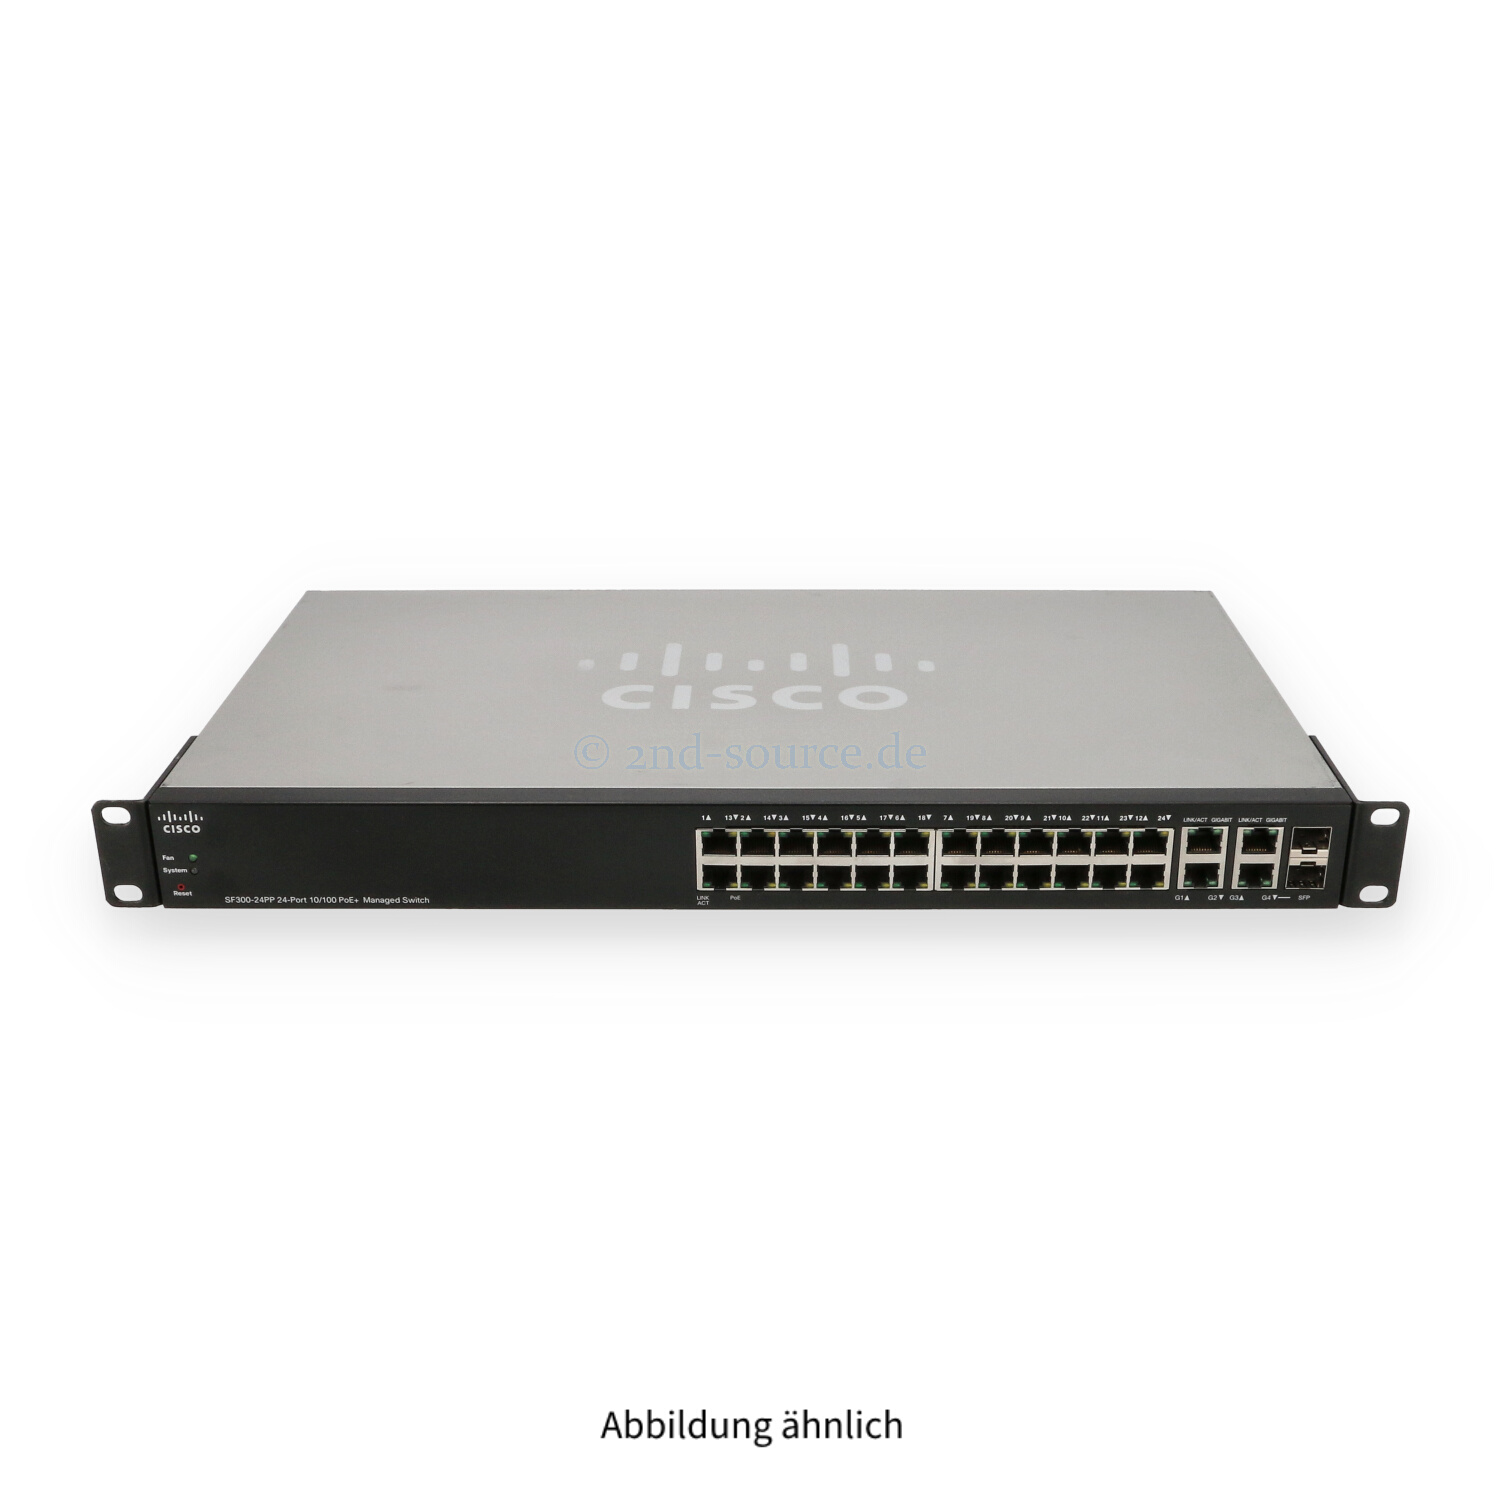 Cisco SF300-24PP 24x 10/100Base-T PoE+ 2x 1GbE 2x Shared SFP 1GbE Managed Switch SF300-24PP-K9